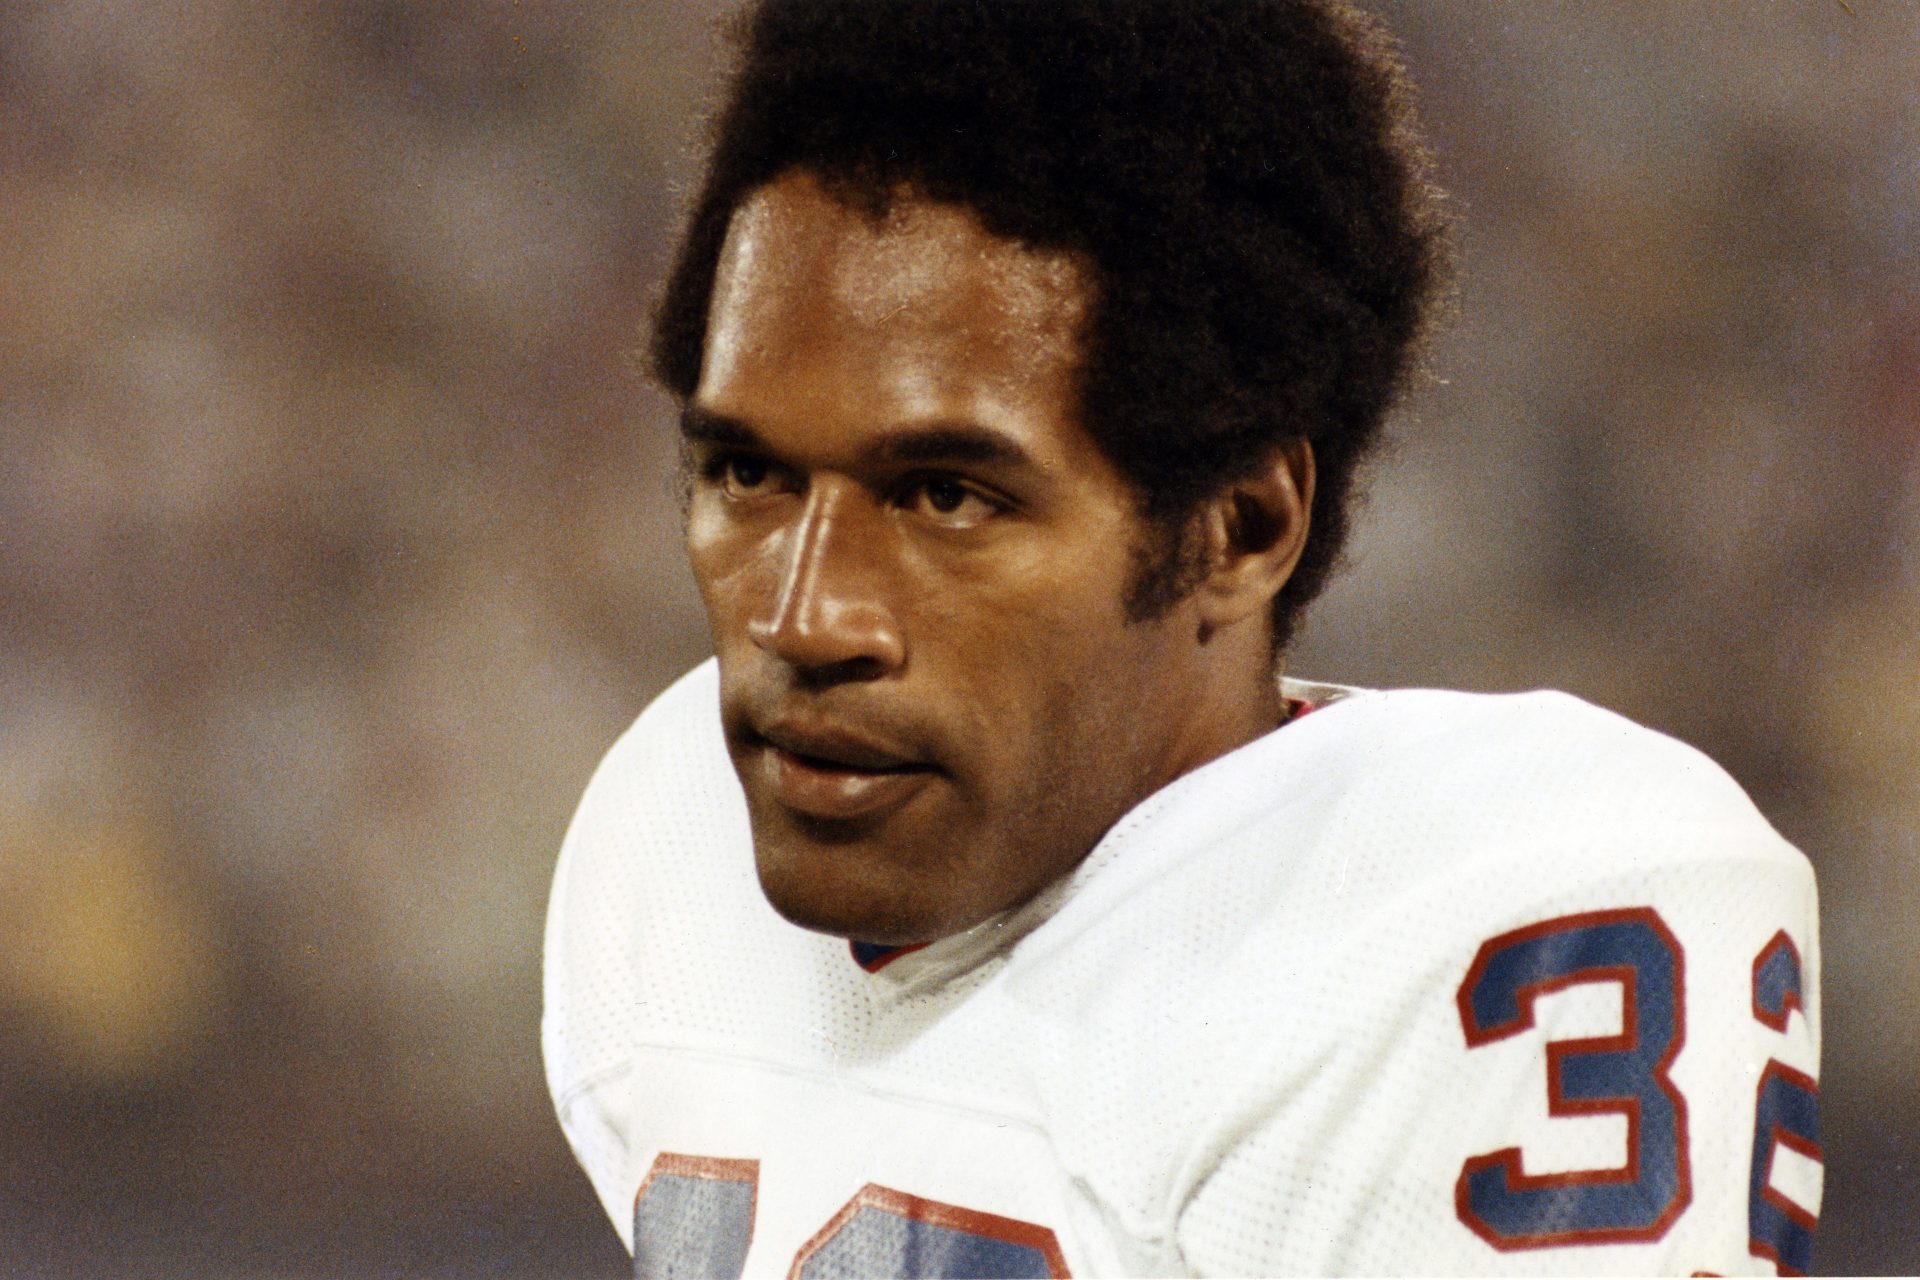 <p>American professional football player, actor, and TV personality OJ Simpson became infamous in the 1990s for being accused of killing his ex-wife Nicole Brown and Ronald Goldman. He died from metastatic prostate cancer at the age of 76.</p>